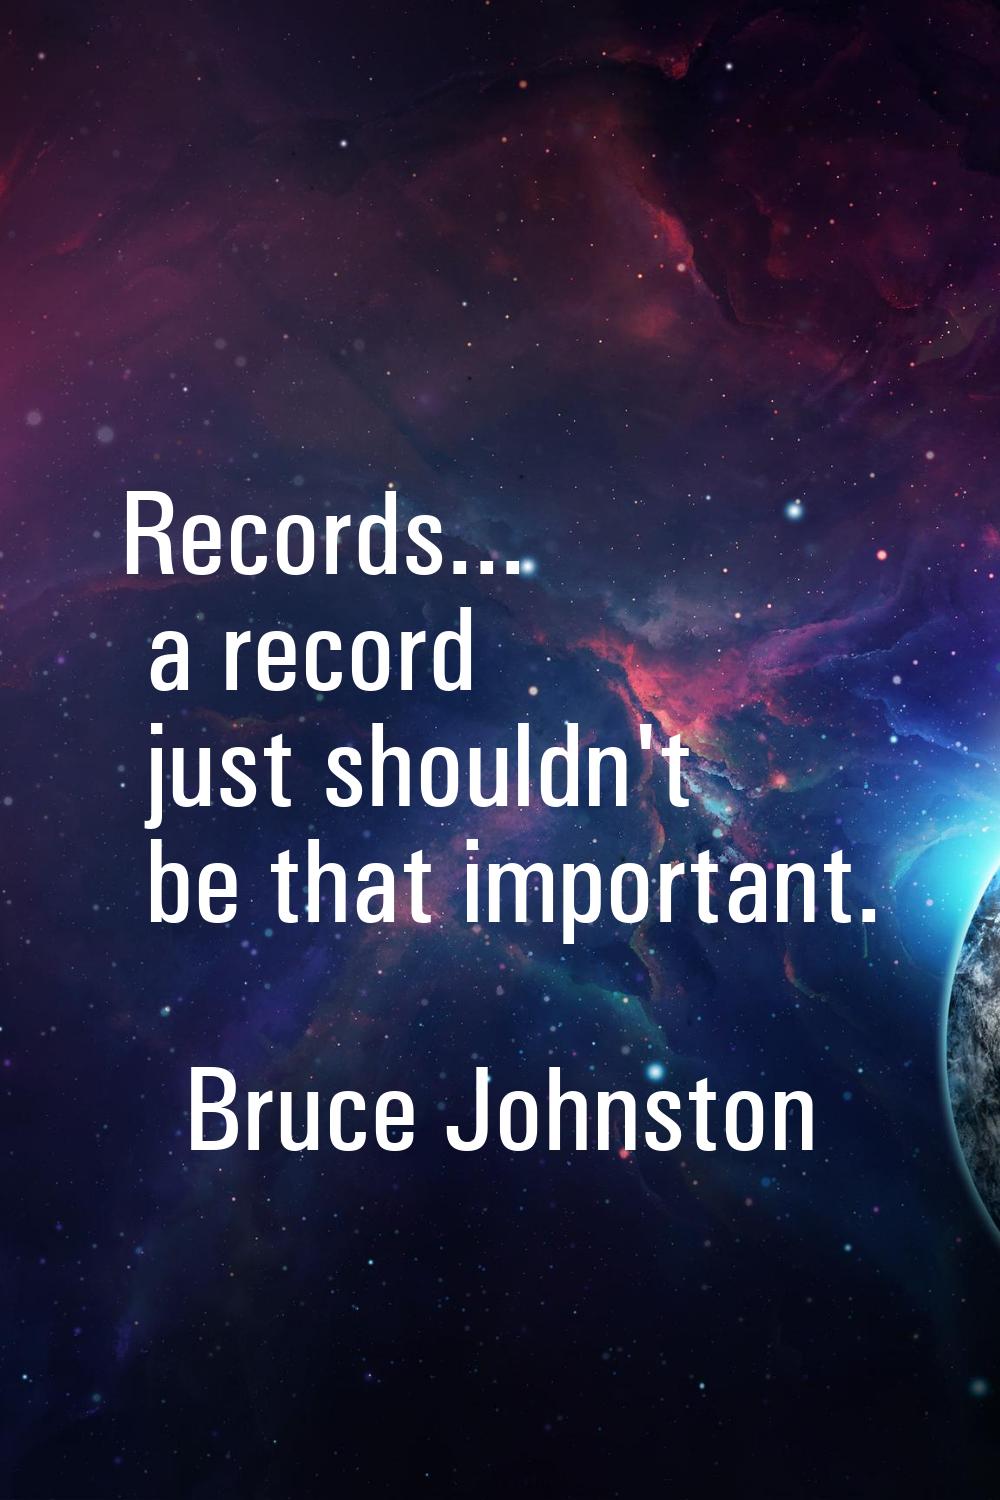 Records... a record just shouldn't be that important.